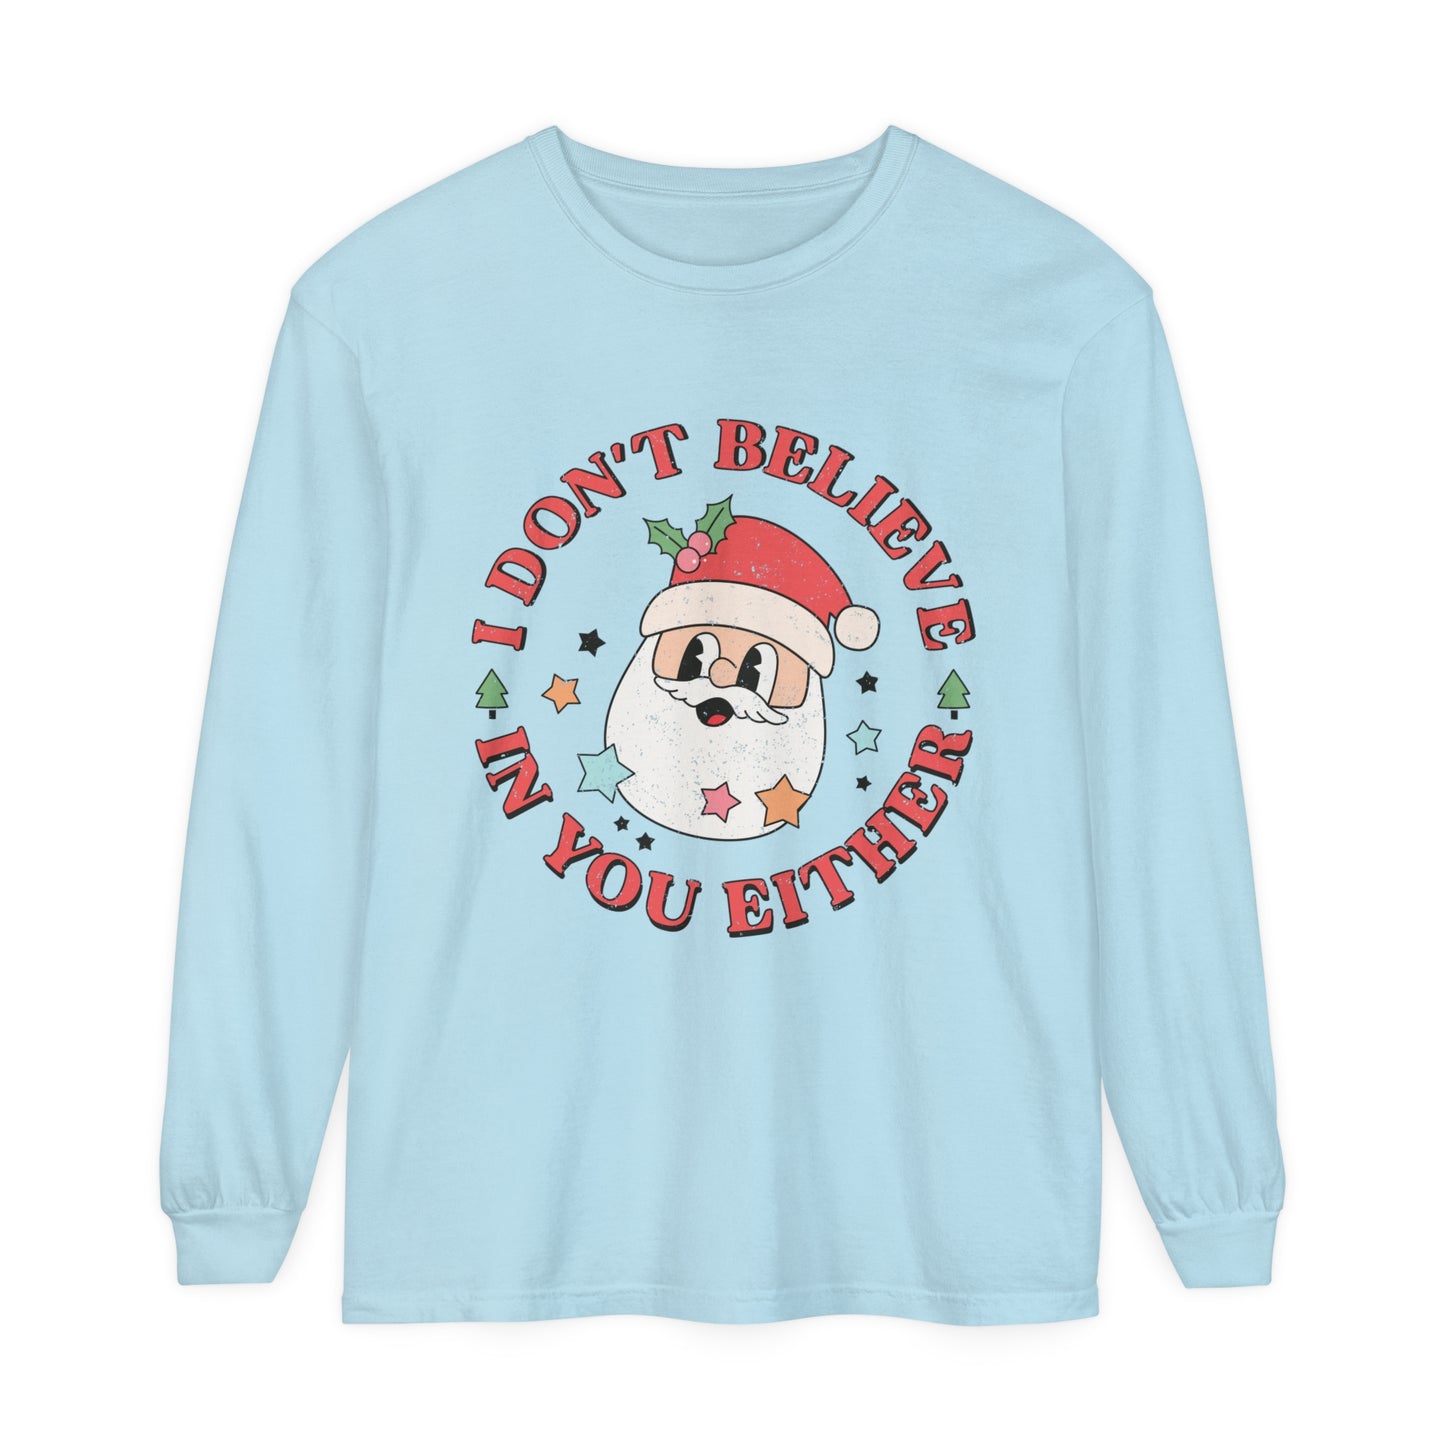 I don't believe in you either Women's Funny Humor Santa Christmas Holiday Loose Long Sleeve T-Shirt